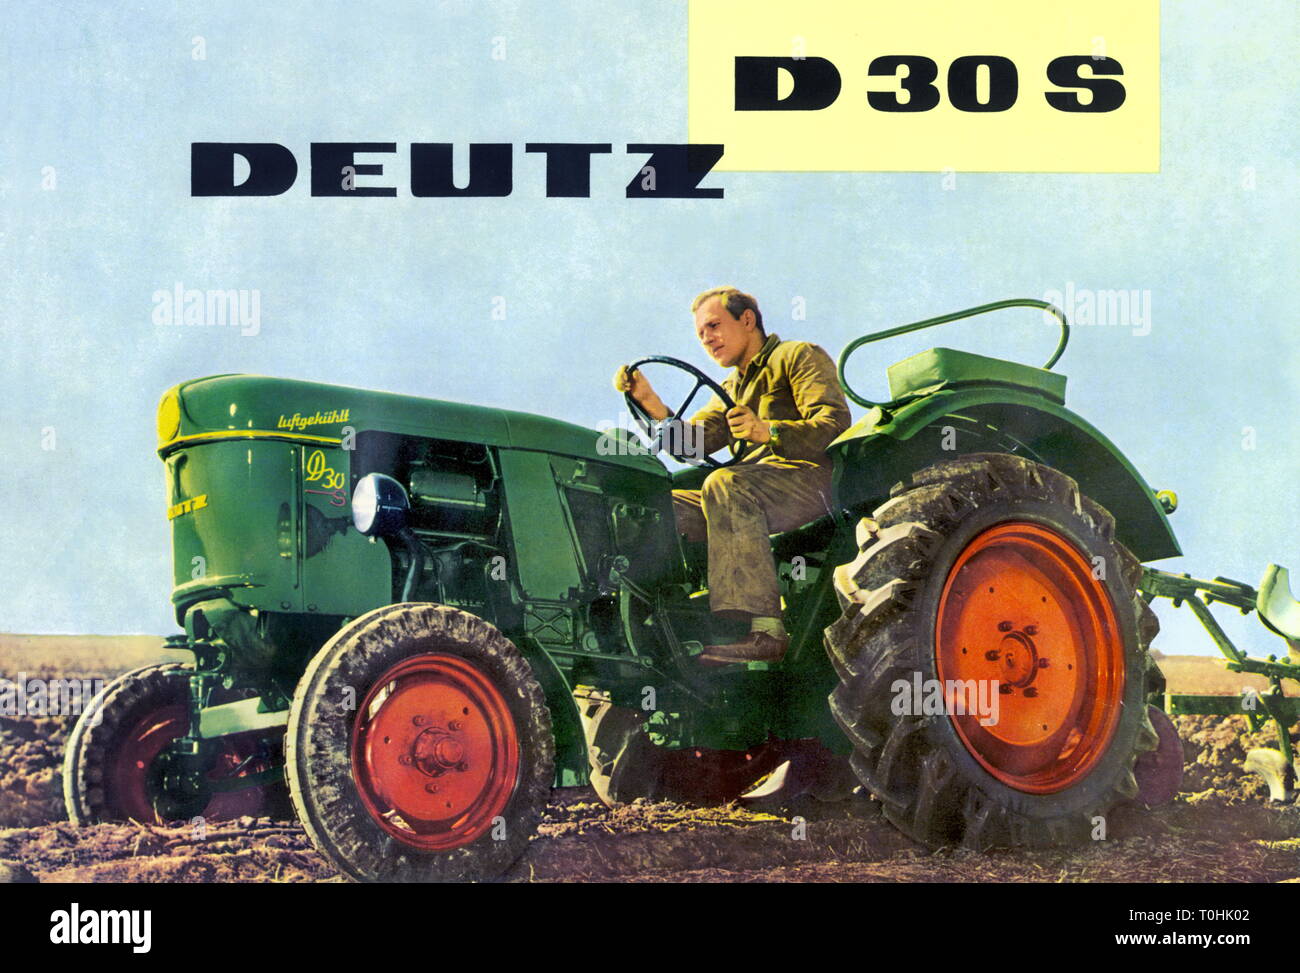 agriculture, machine, traction engine Deutz, D30, Germany, 1962, agriculturist, cultivator, raiser, agriculturists, cultivators, raisers, farmer, farmers, tractors, traction engine, tractor, motor, motors, two-cylinder-four-stroke diesel engine, diesel engine, diesel engines, diesel, air-cooled, single wheel suspension, green, acre, acres, field, fields, field work, fieldwork, tillage, tilth, arable farming, works, working, agricultural work, farm labour, farm labor, man, men, driving, agriculture, farming, 60s, tractor driver, motorization, agri, Additional-Rights-Clearance-Info-Not-Available Stock Photo